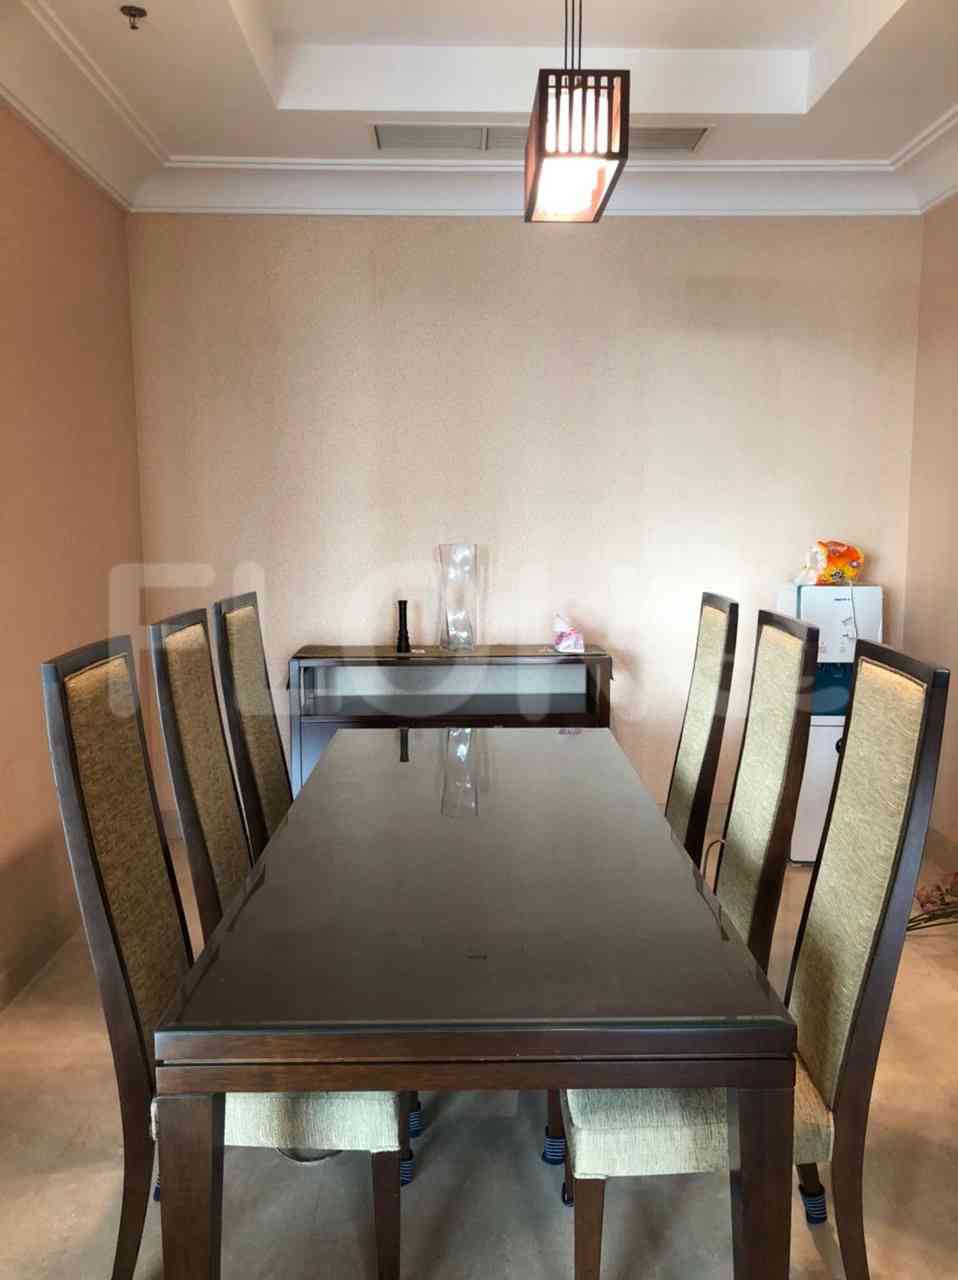 2 Bedroom on 9th Floor for Rent in Pakubuwono View - fga42e 7